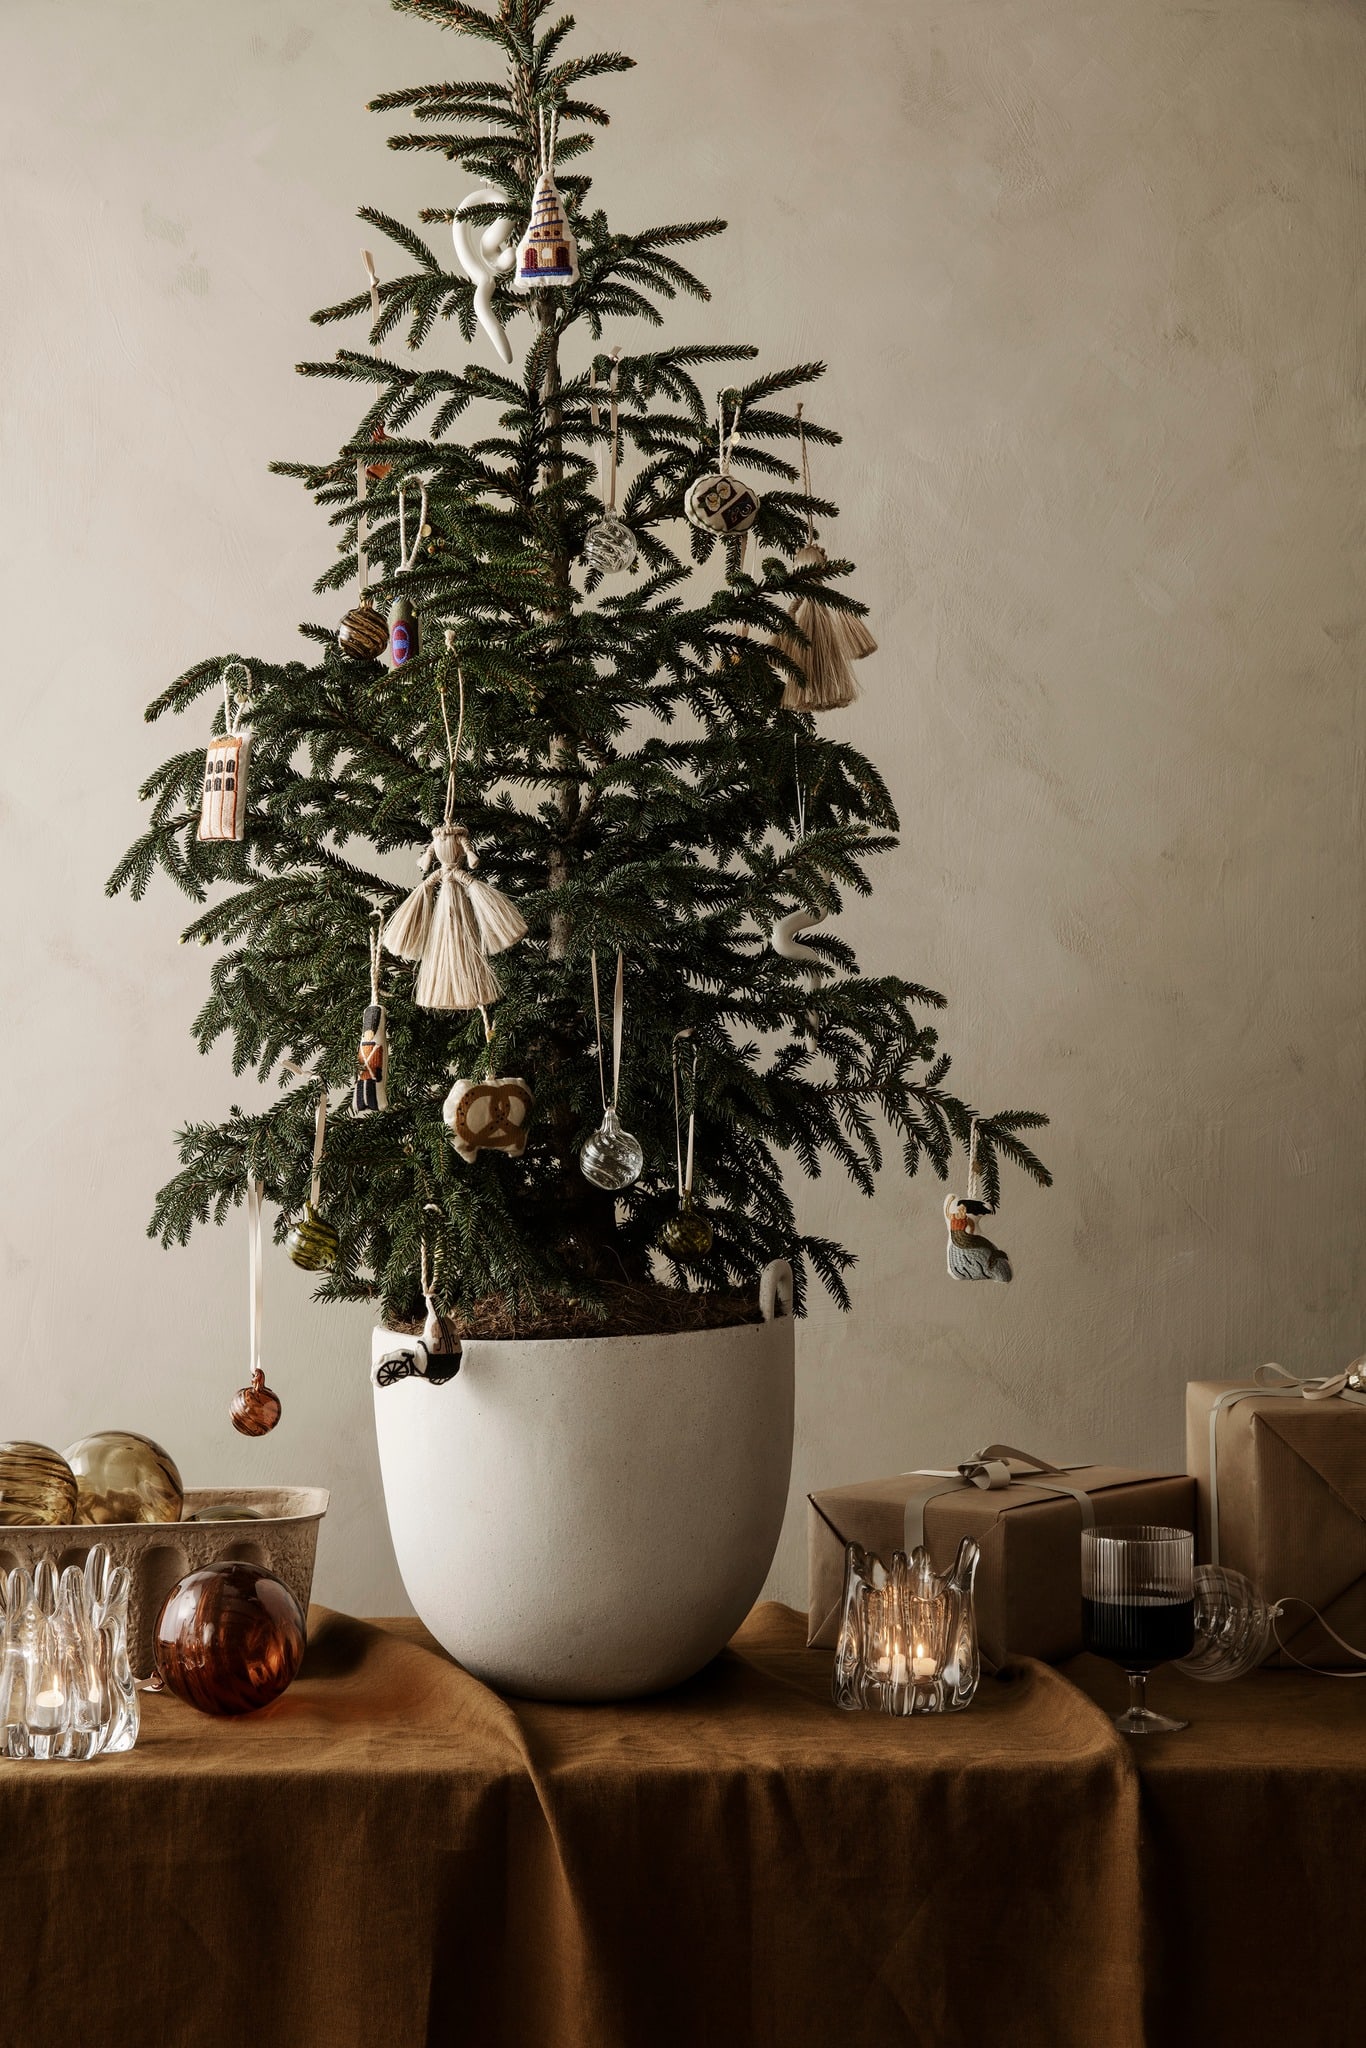 Simple Christmas tree idea featuring a minimalist and rustic tree on a ceramic pot